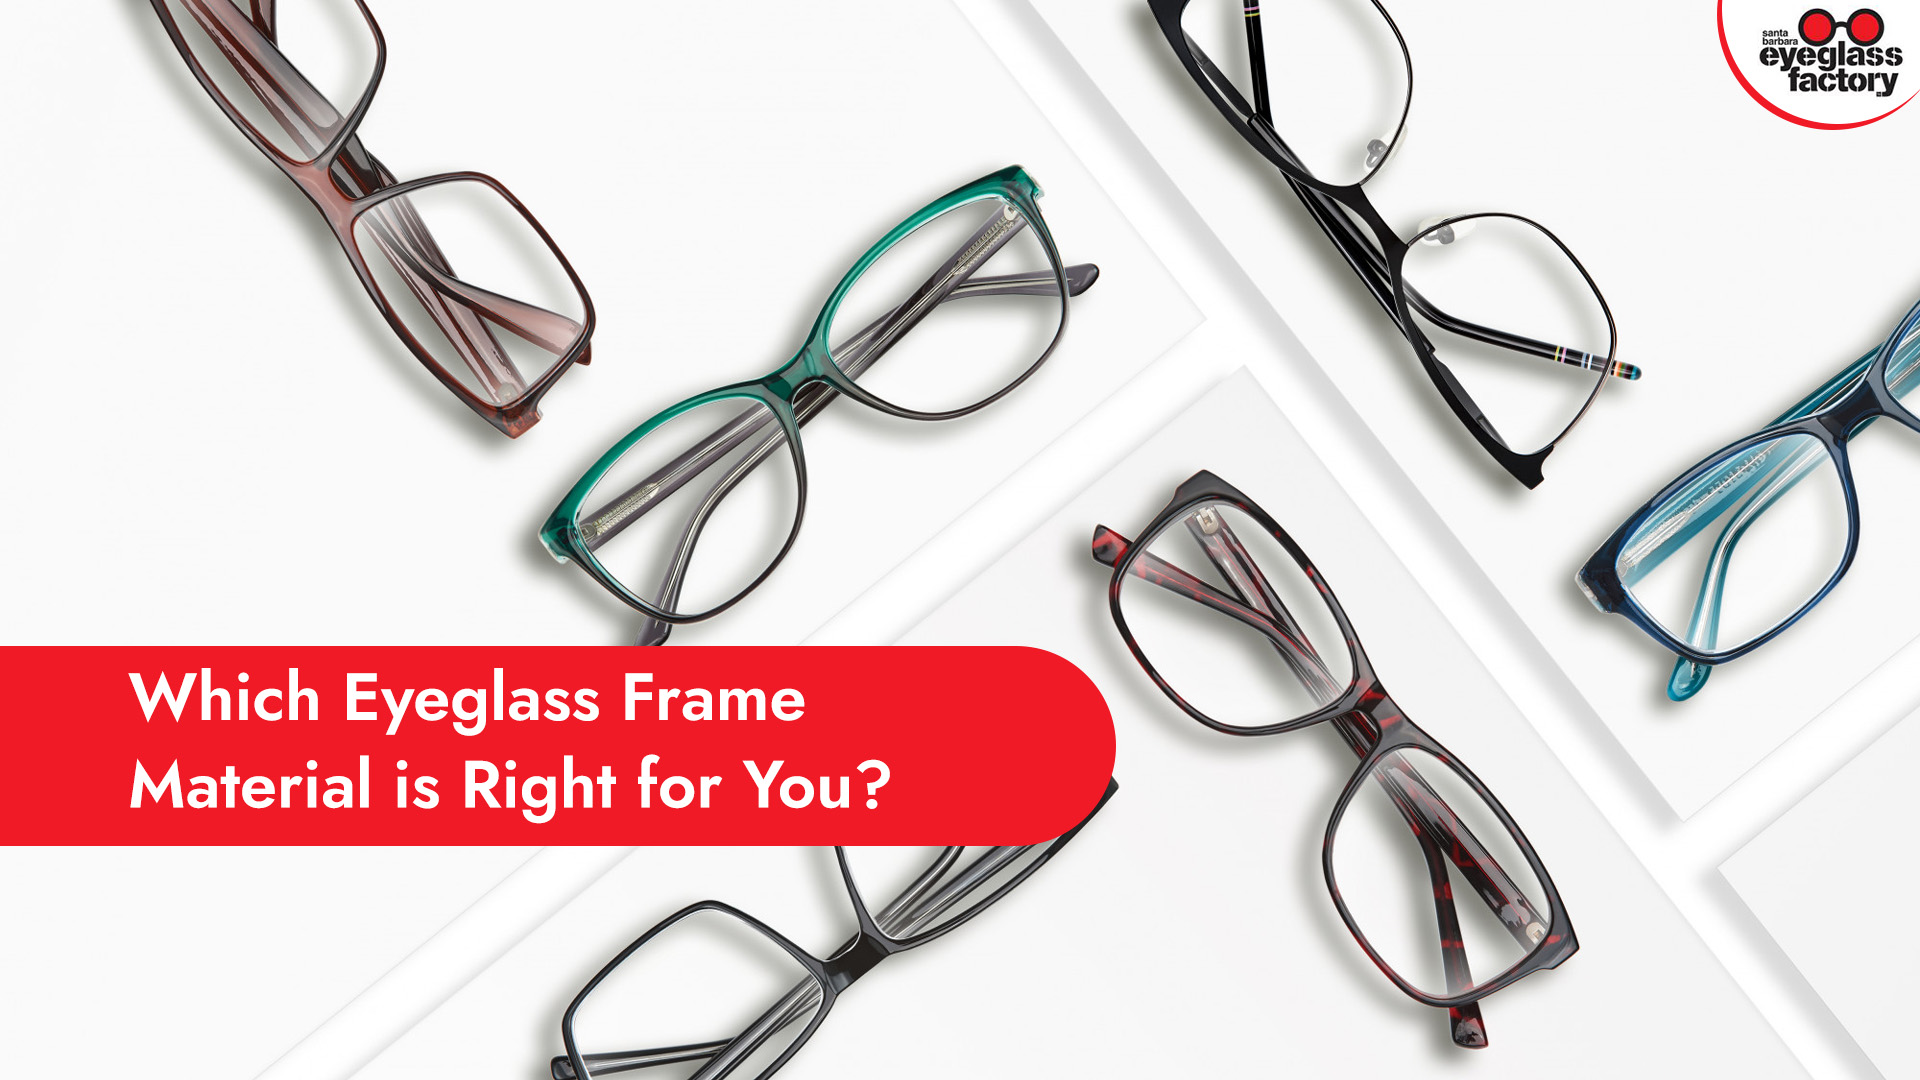 Which Eyeglass Frame Material is Right for You